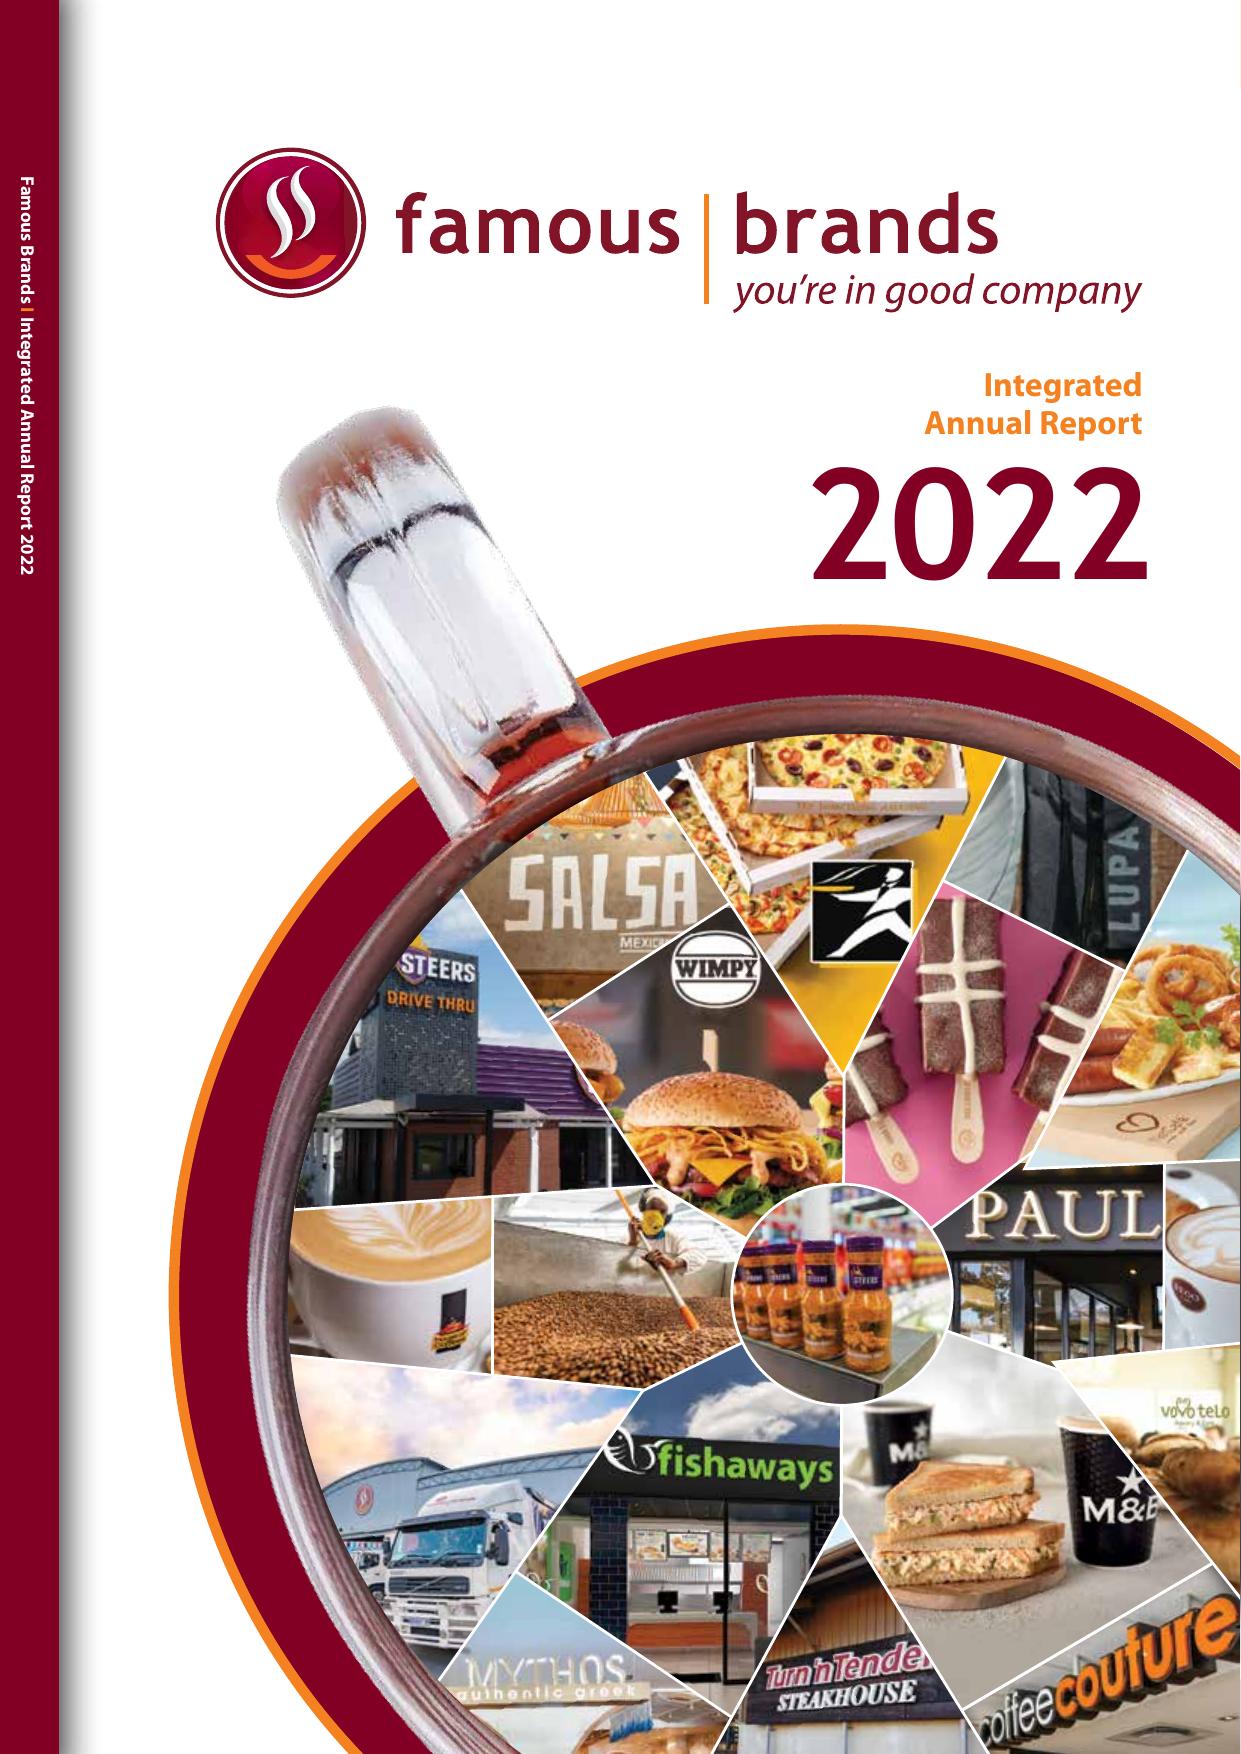 FOODSERVICEDIRECT 2022 Annual Report